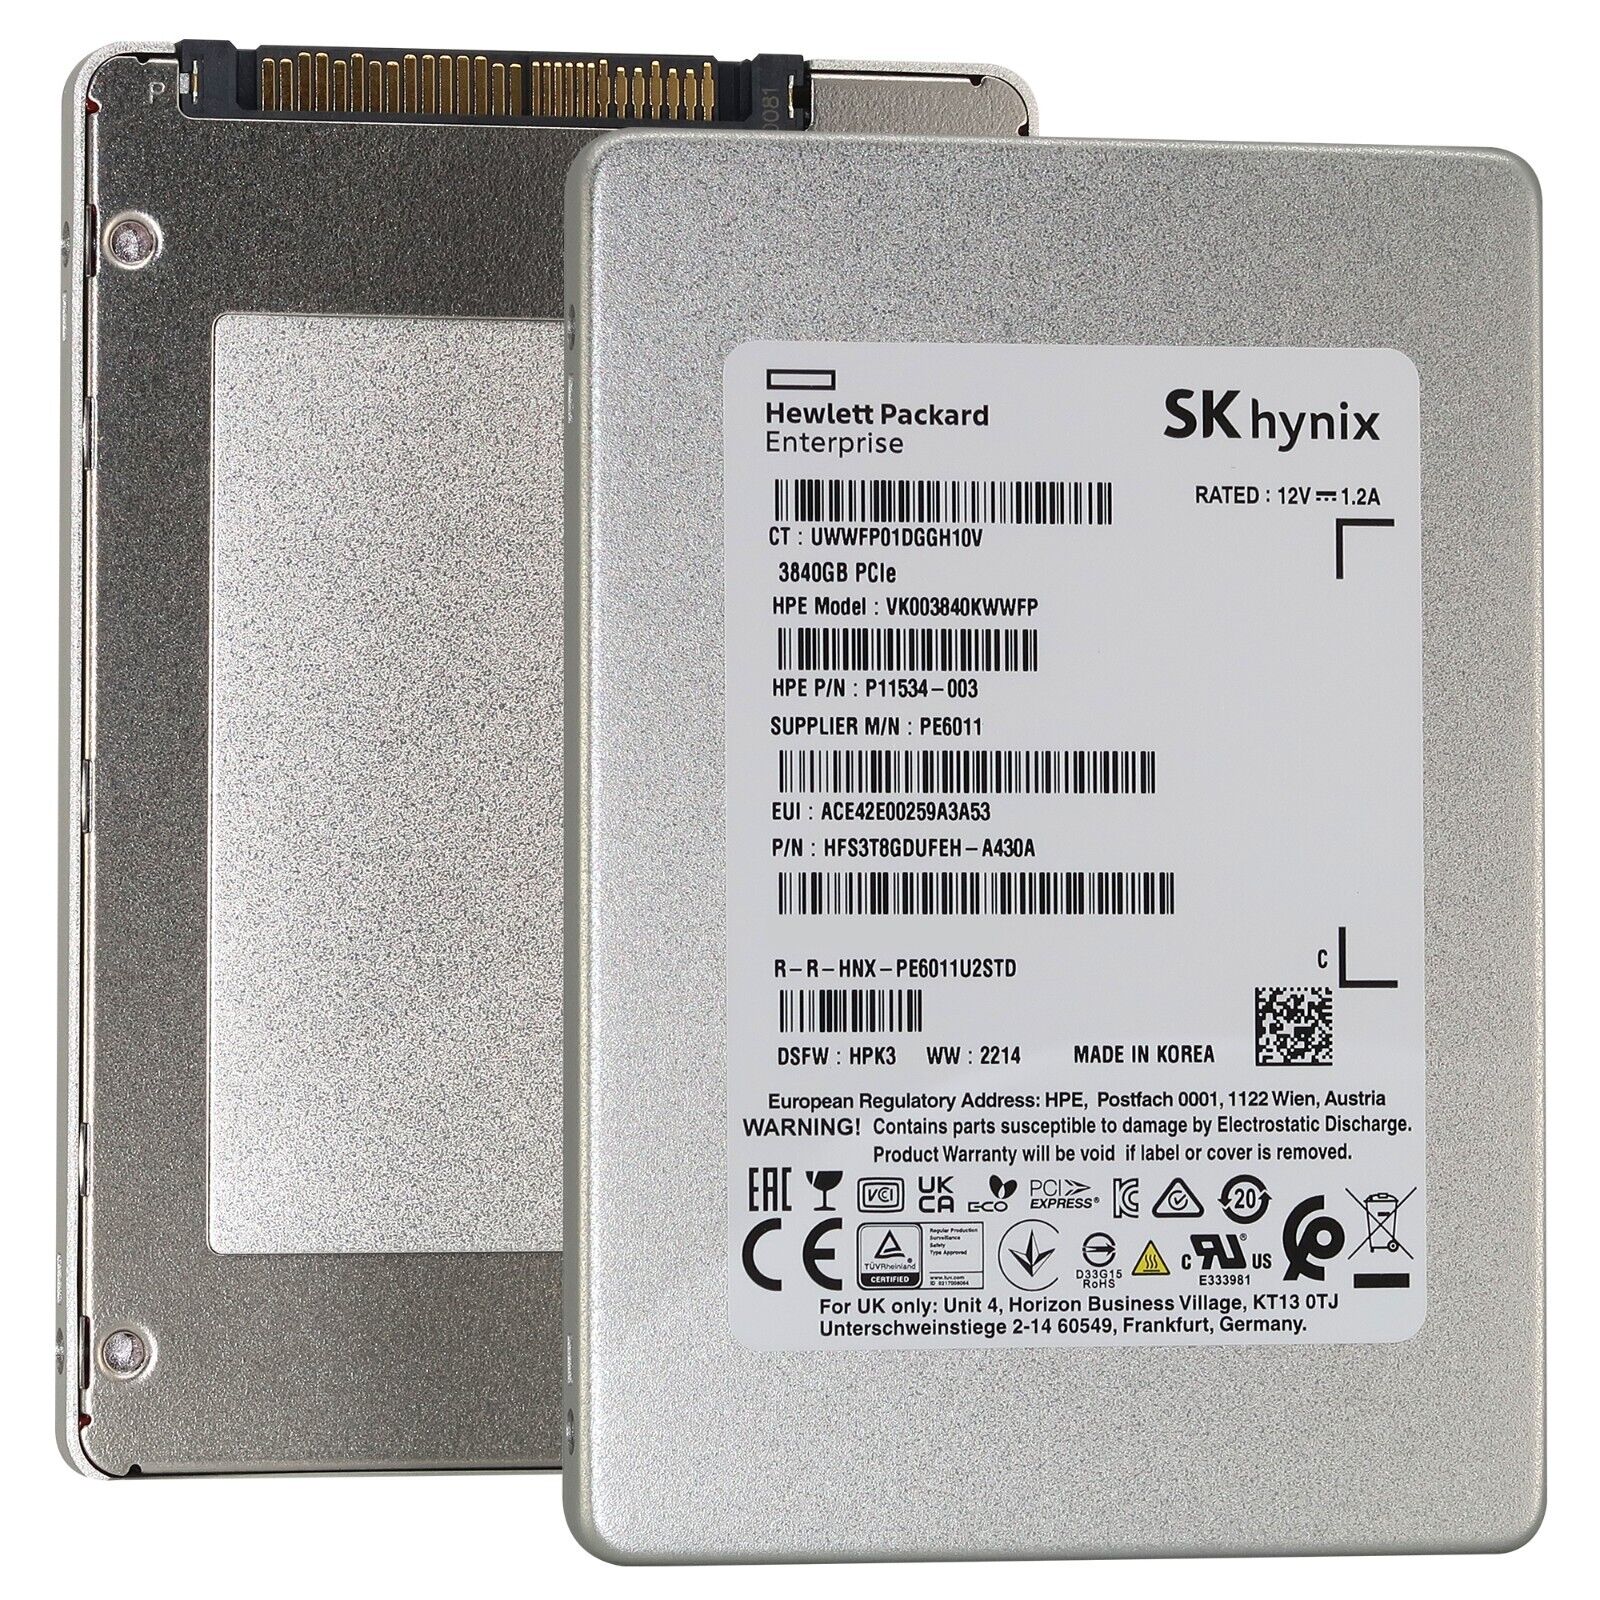 SK Hynix PE6011 HFS3T8GDUFEH 3.84TB PCIe Gen 3.0 x4 4GB/s 3D TLC U.2 NVMe 2.5in Recertified Solid State Drive